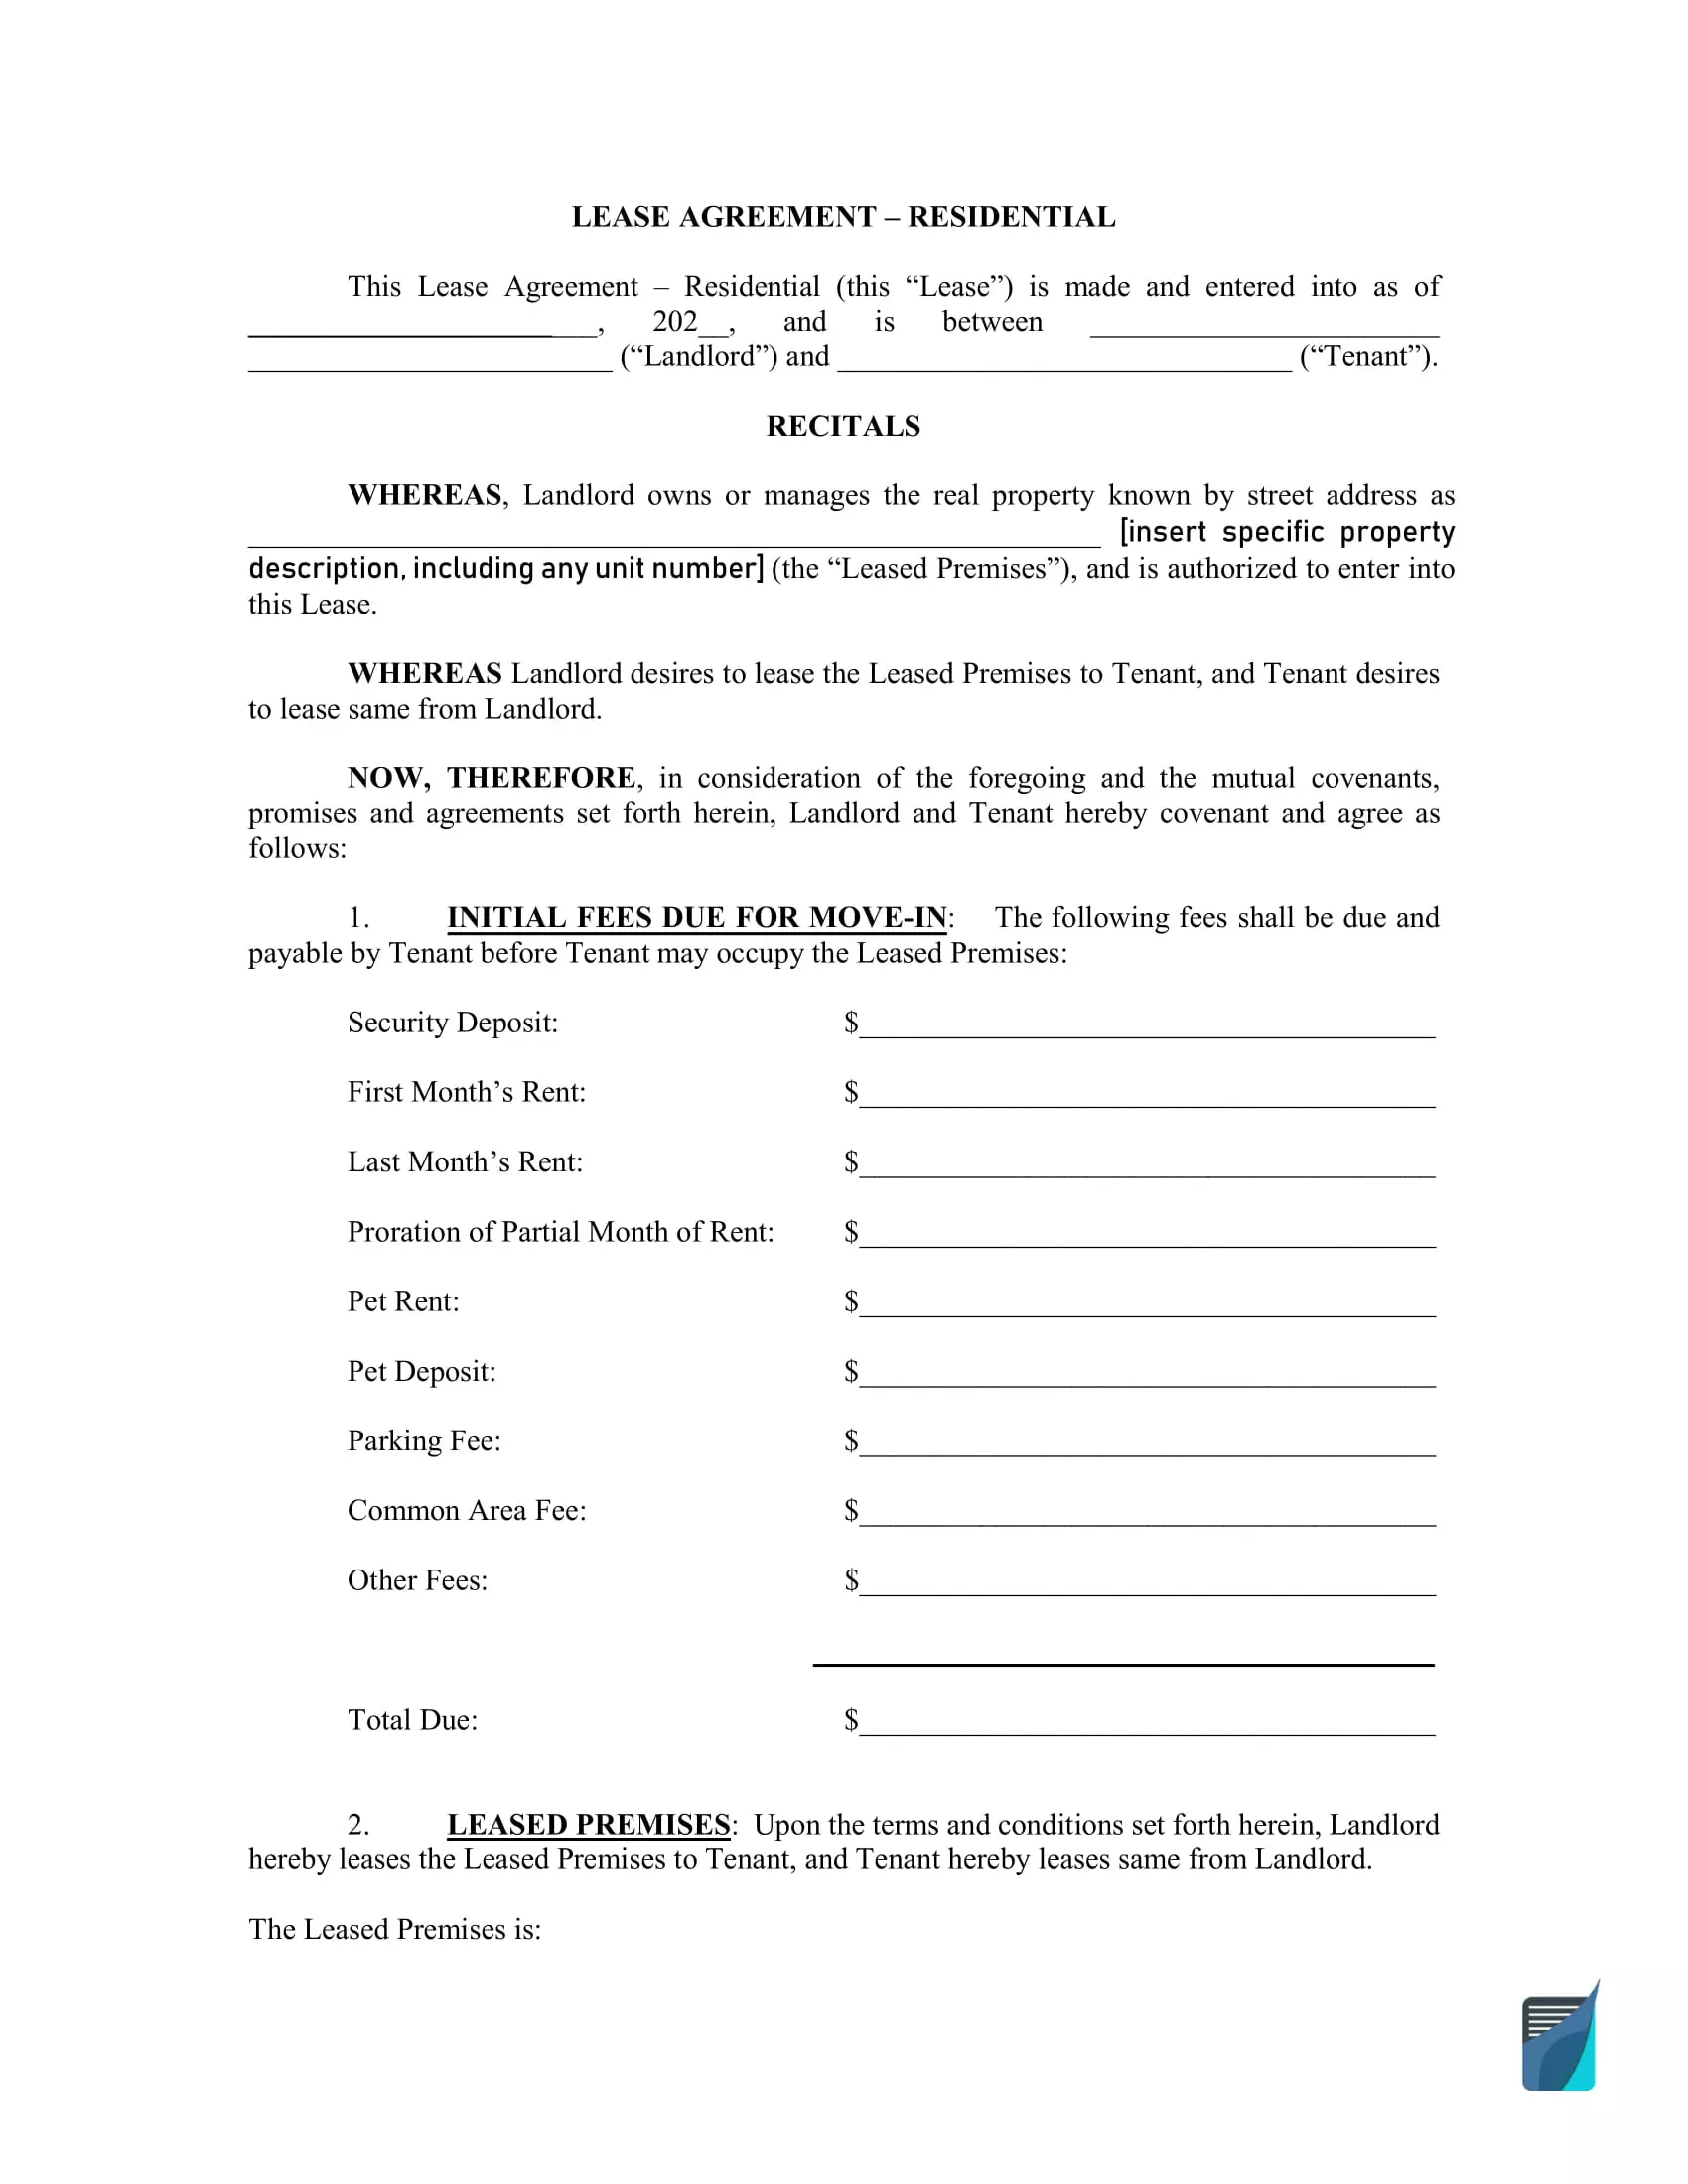 lease agreement template